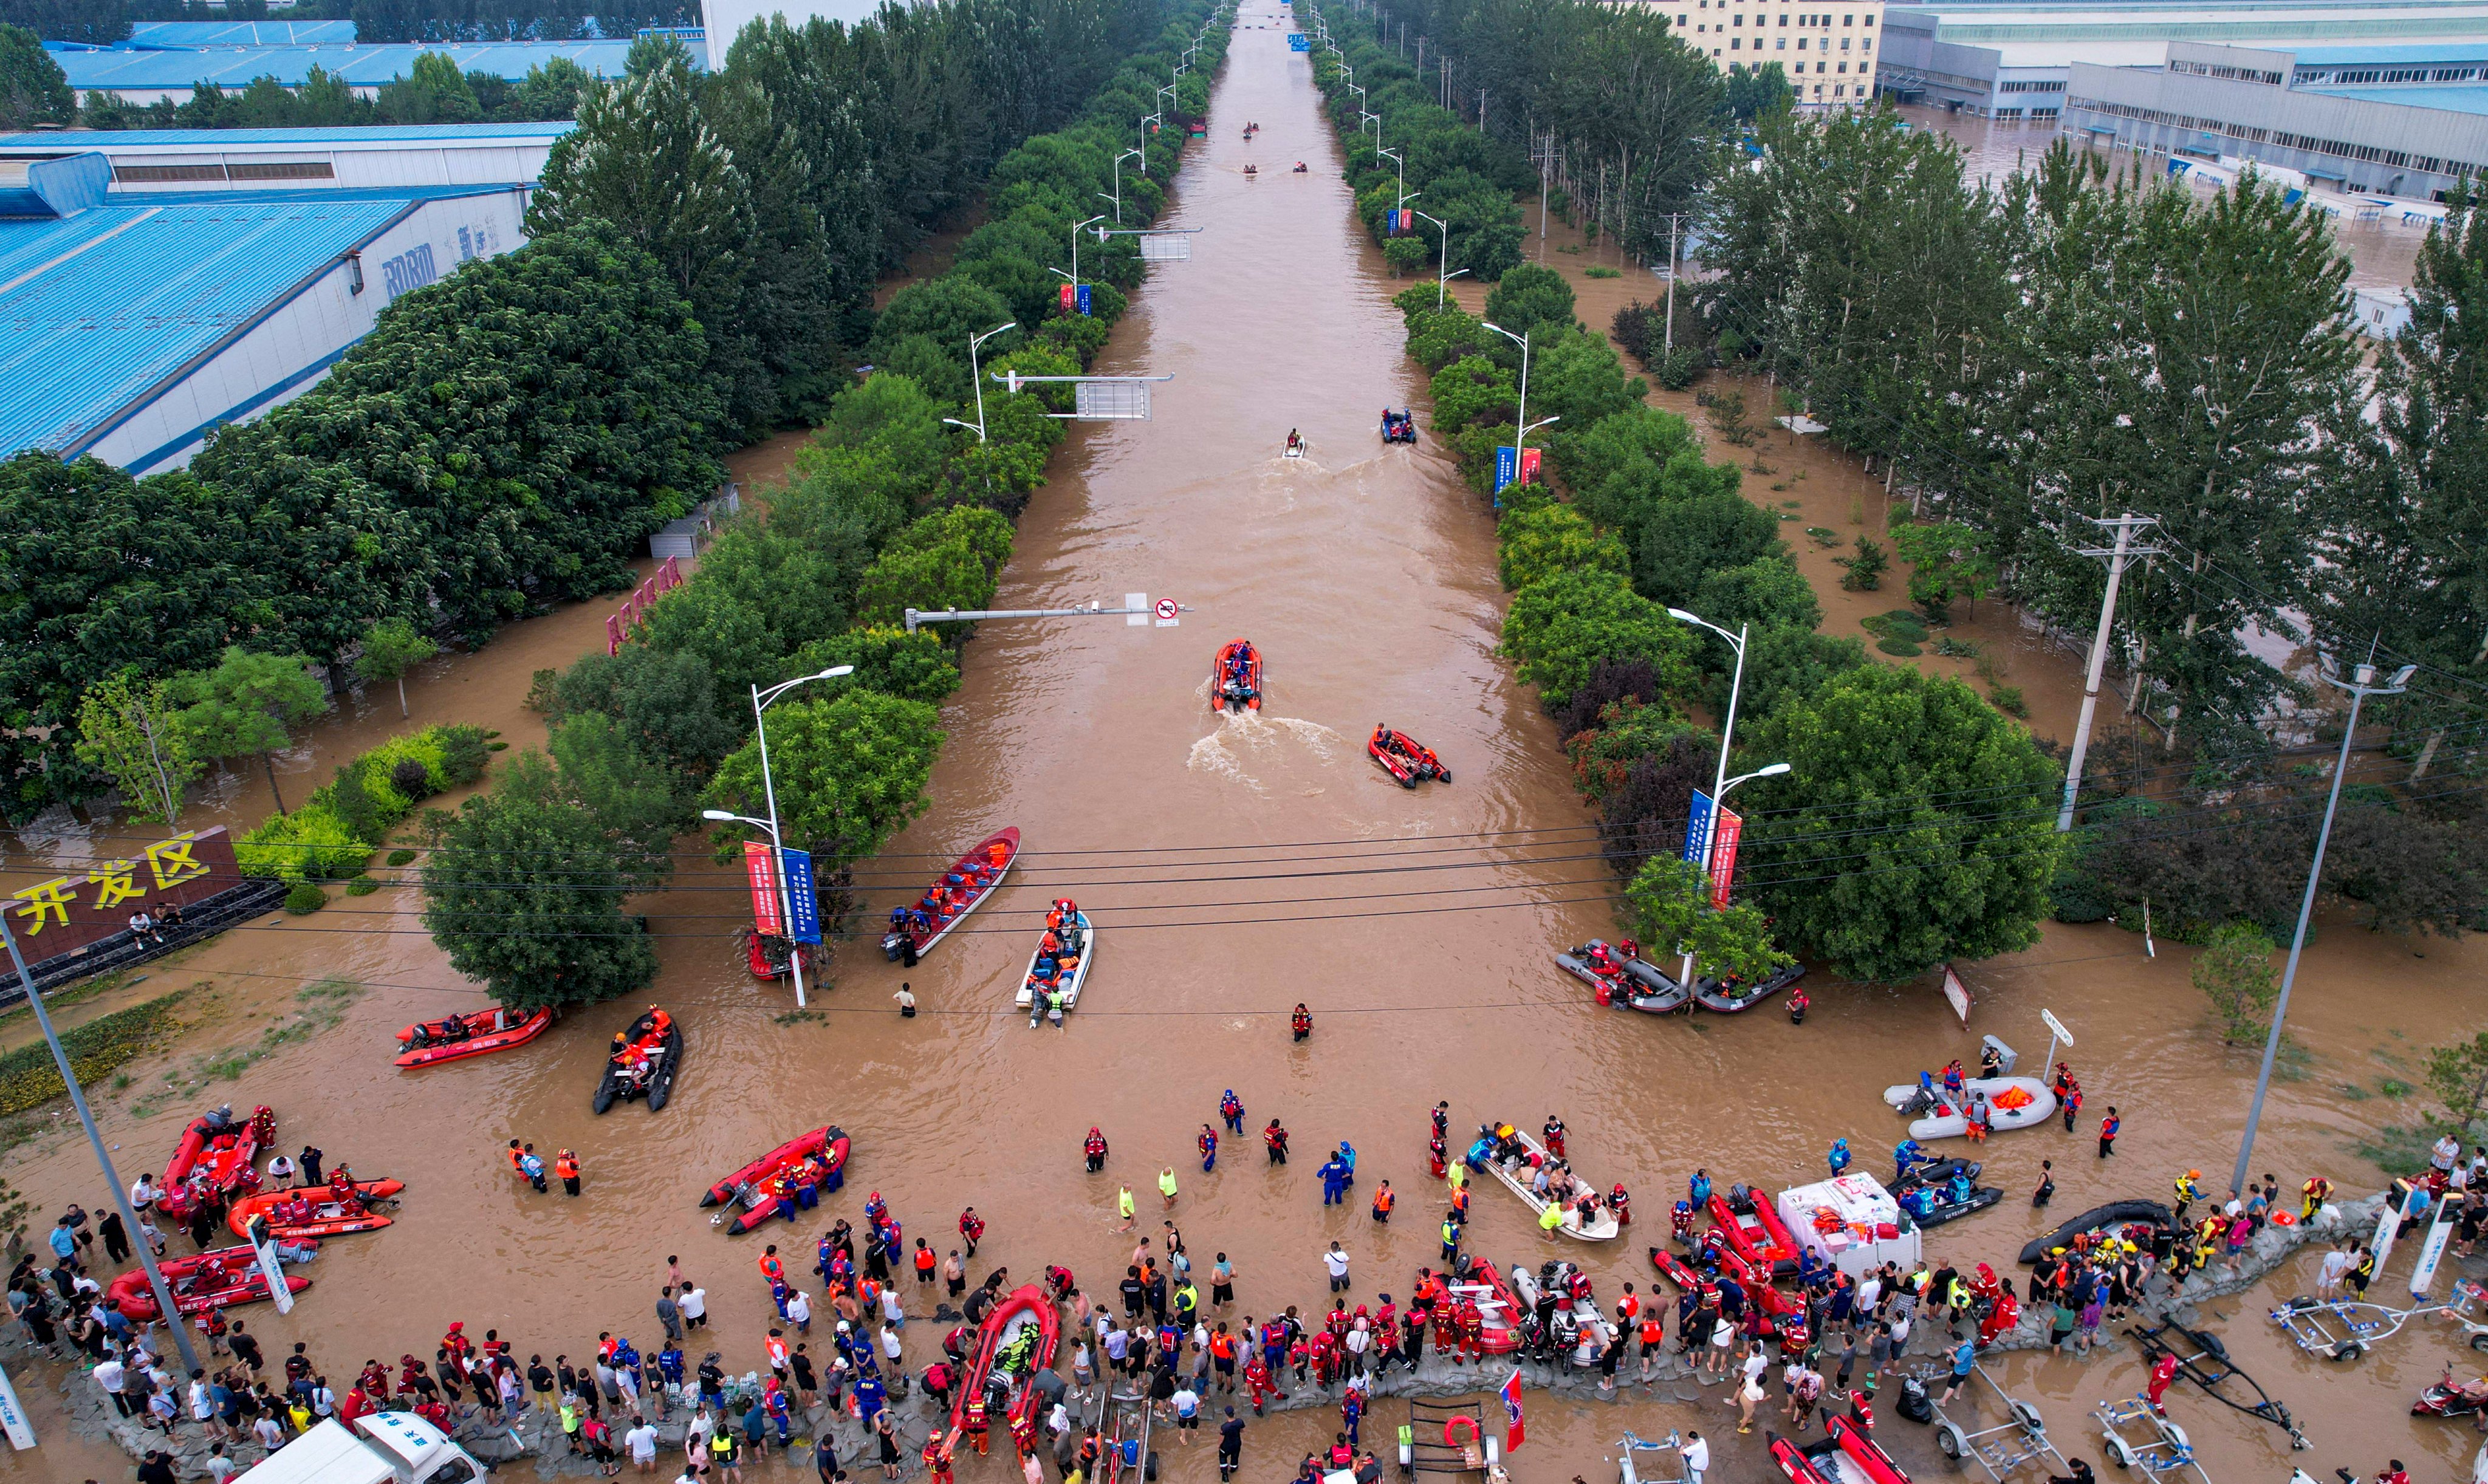 Rescue workers navigate a flooded road at an industrial development zone in Zhuozhou, Hebei province, on Wednesday. Photo: cnsphoto via Reuters